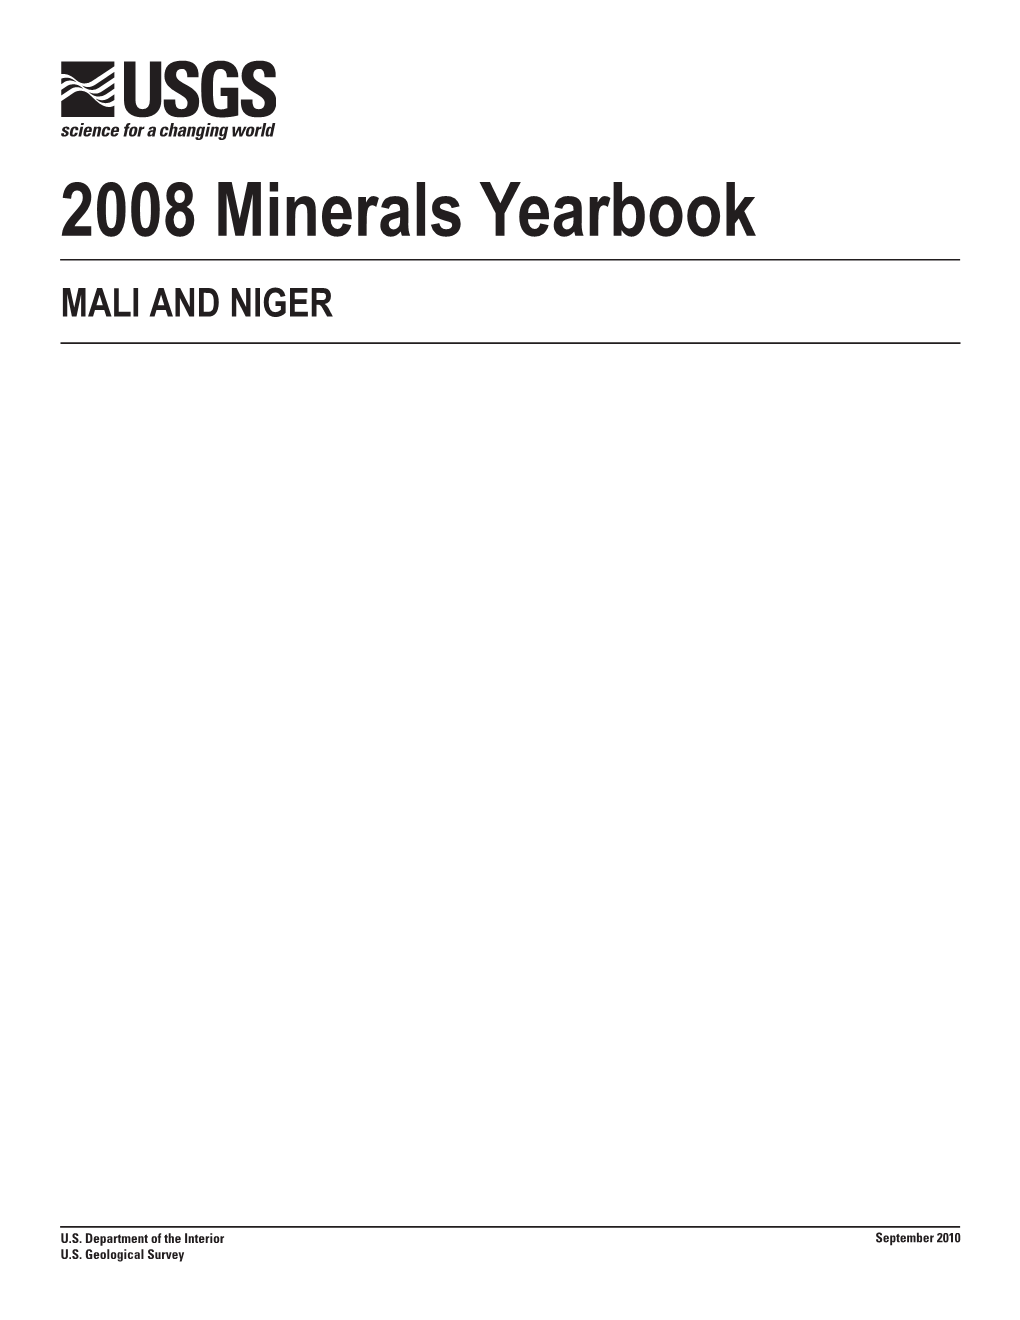 The Mineral Industries of Mali and Niger in 2008